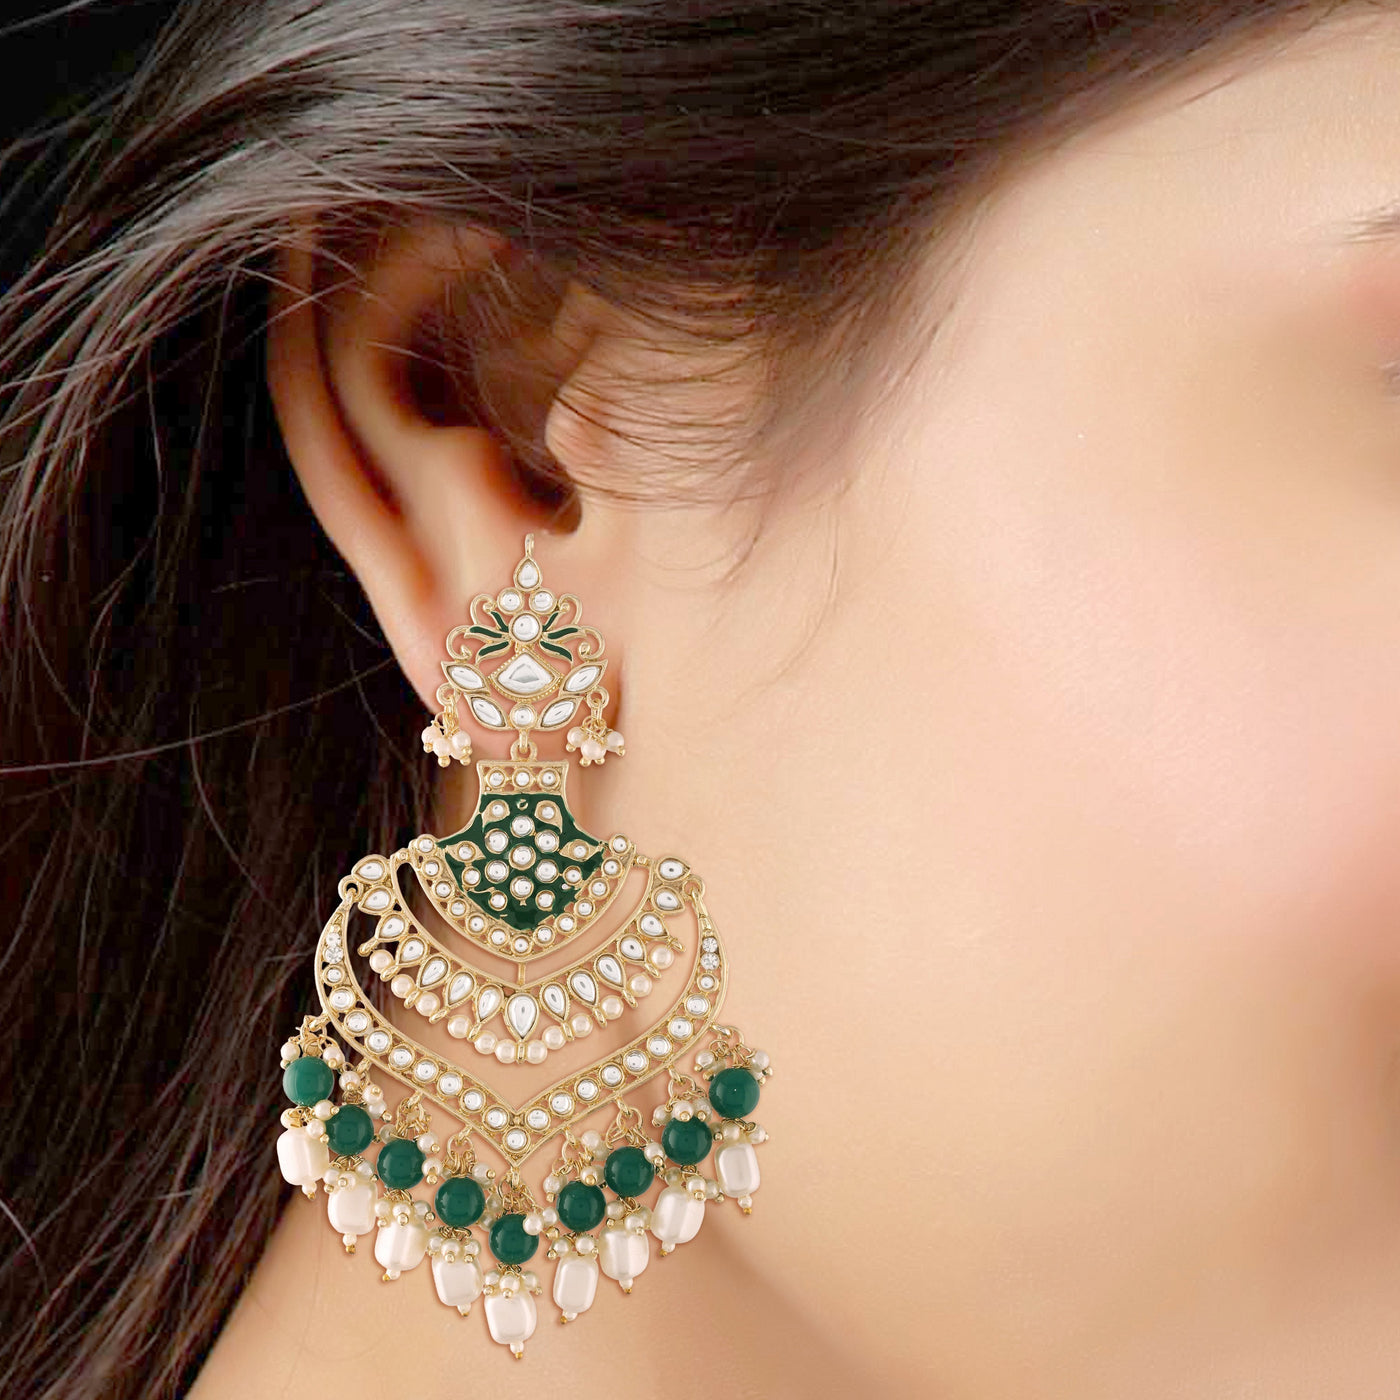 Women Golden and Green Kundan and Beads Earrings by I Jewels (1 Pc Set)